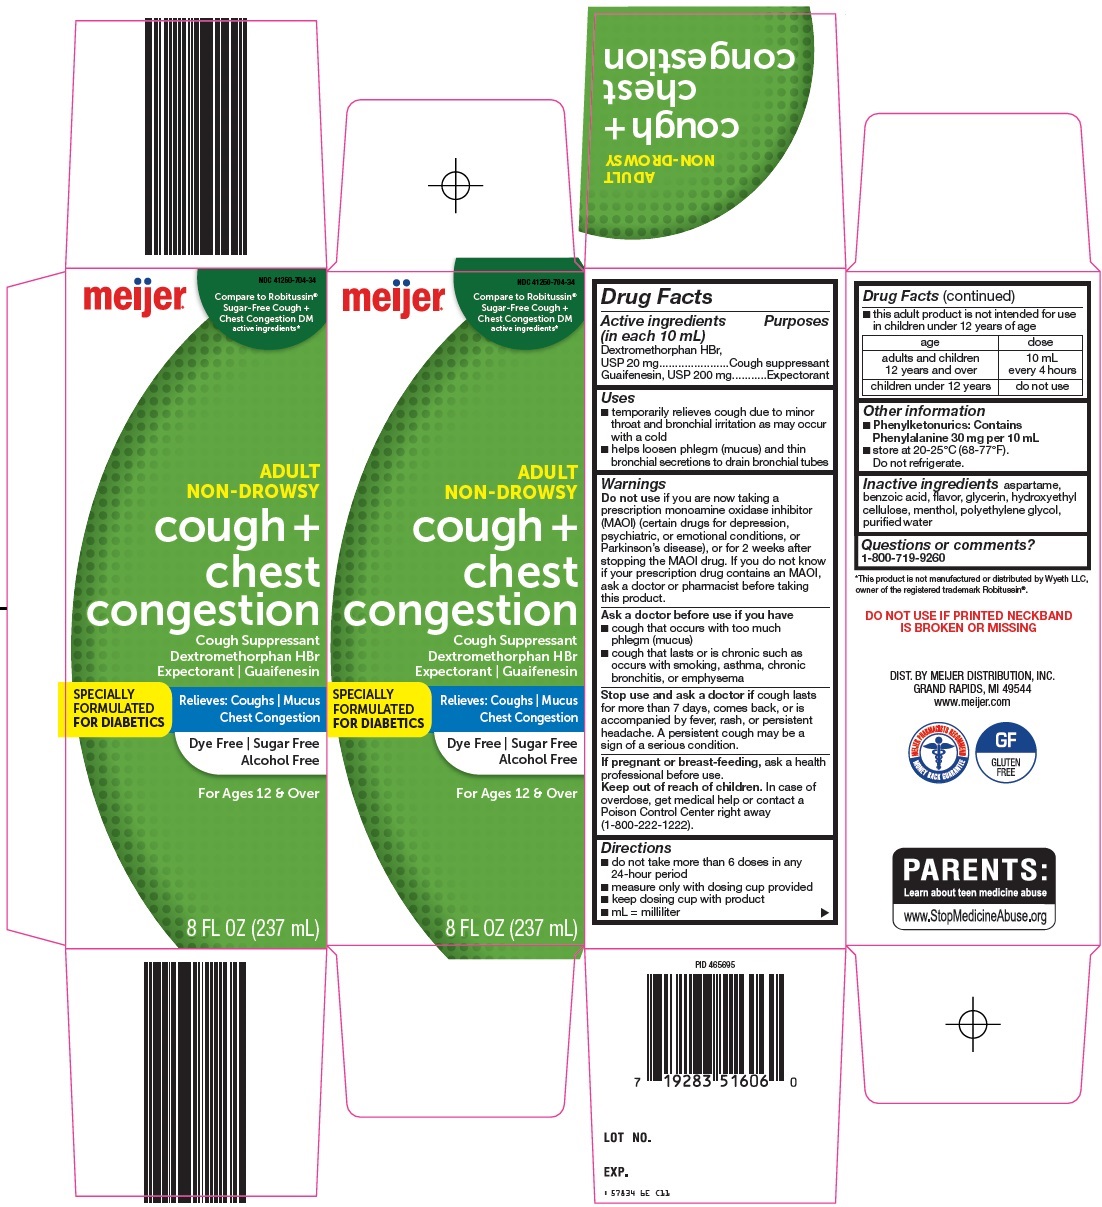 Cough and Chest Congestion Carton